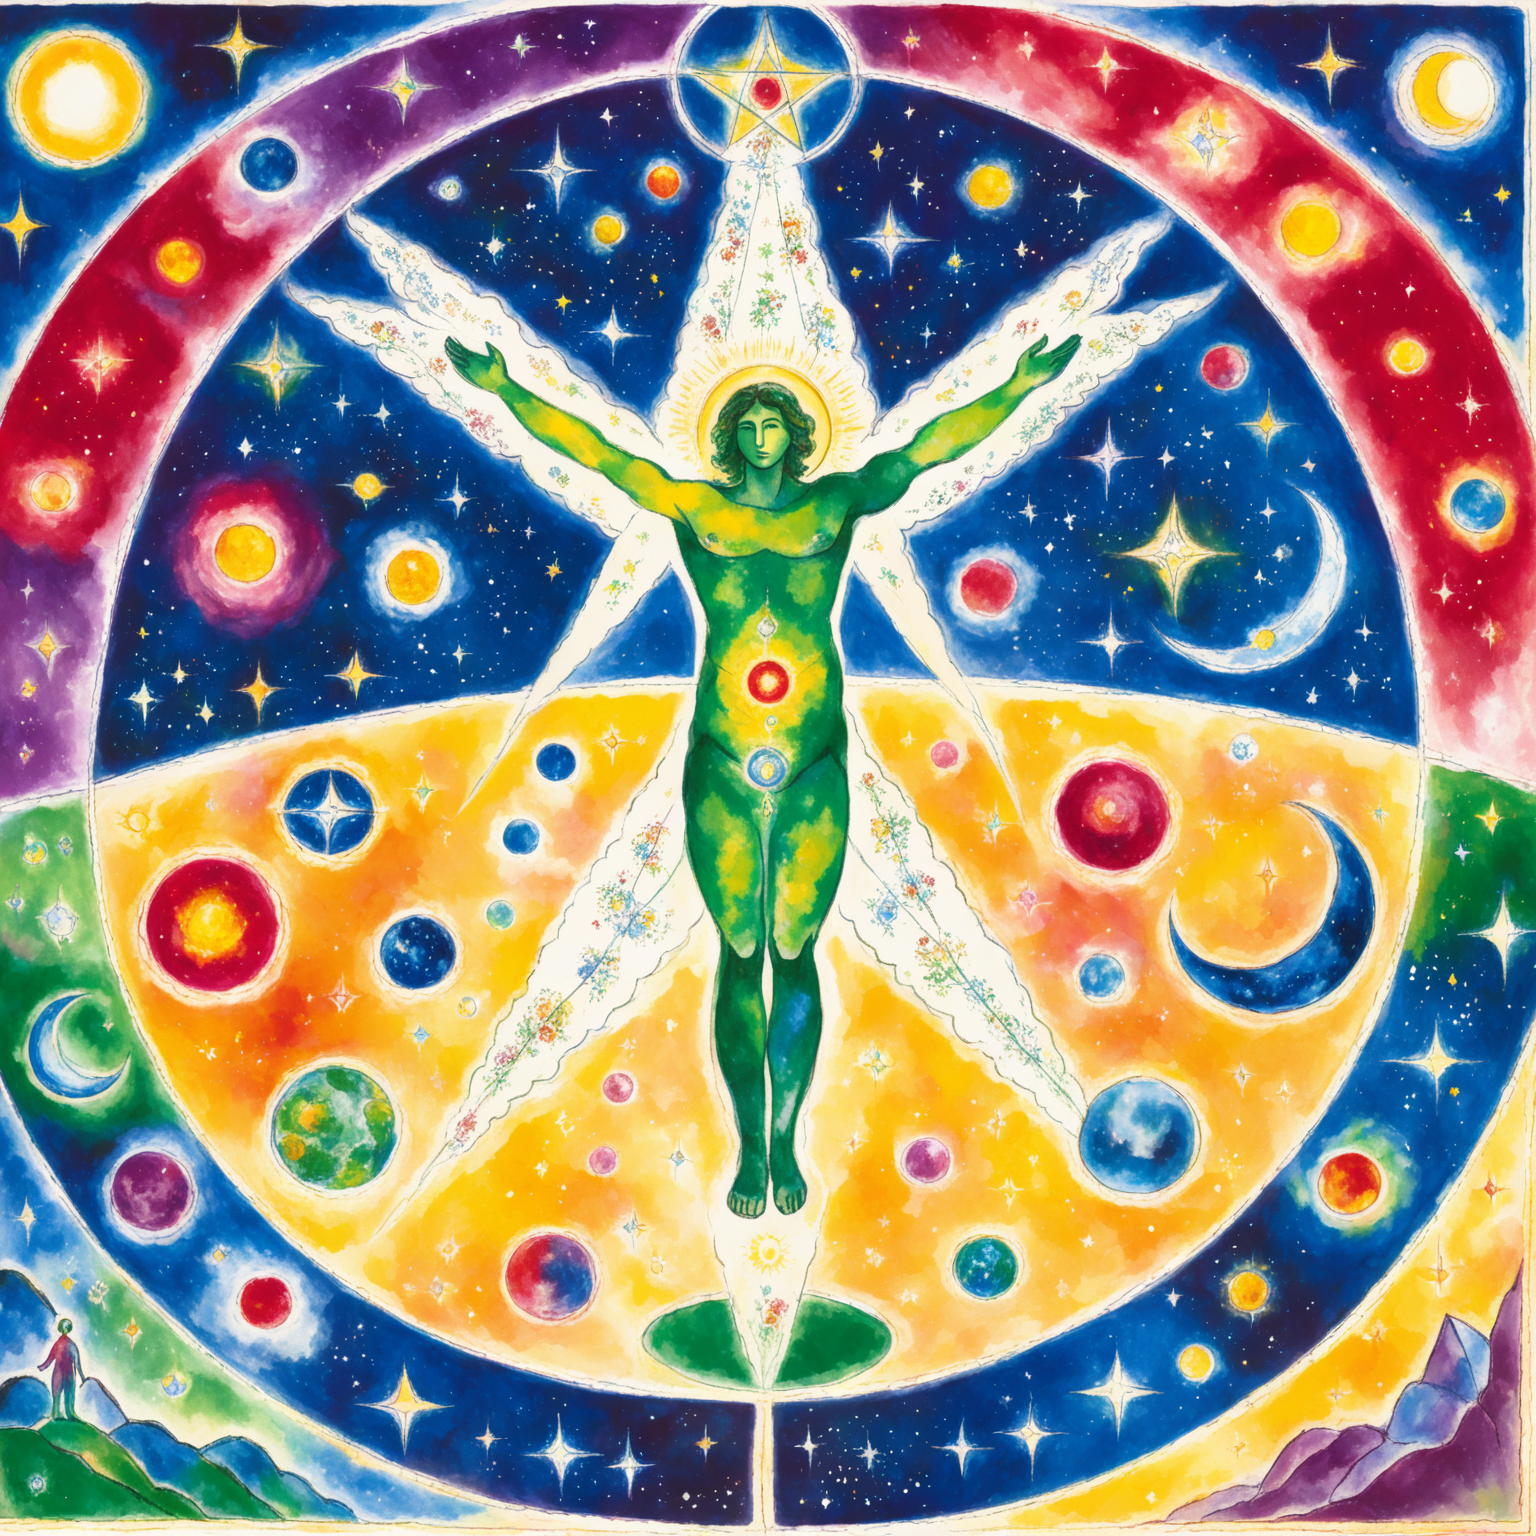 
Generate a picture in the style of the artist Marc Chagall of a kabbalistic creation scene of the cosmos with God radiating at the center with the cosmos and universe as the background need  a VERY  large MALE GOD figure
